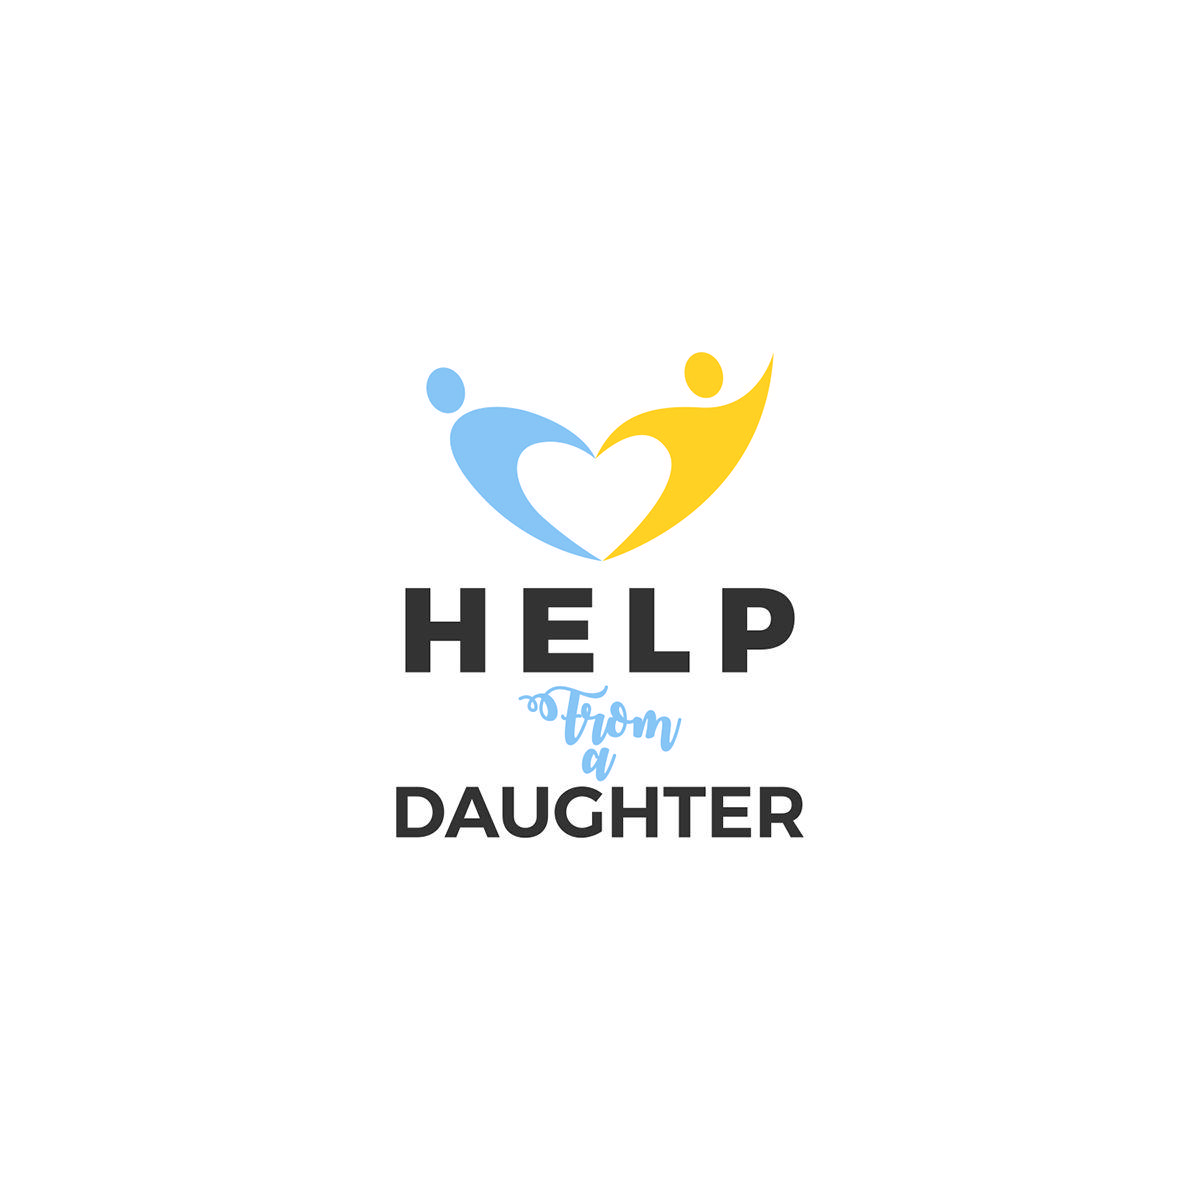 Daughter Logo - Elegant, Traditional, It Company Logo Design for Help From A